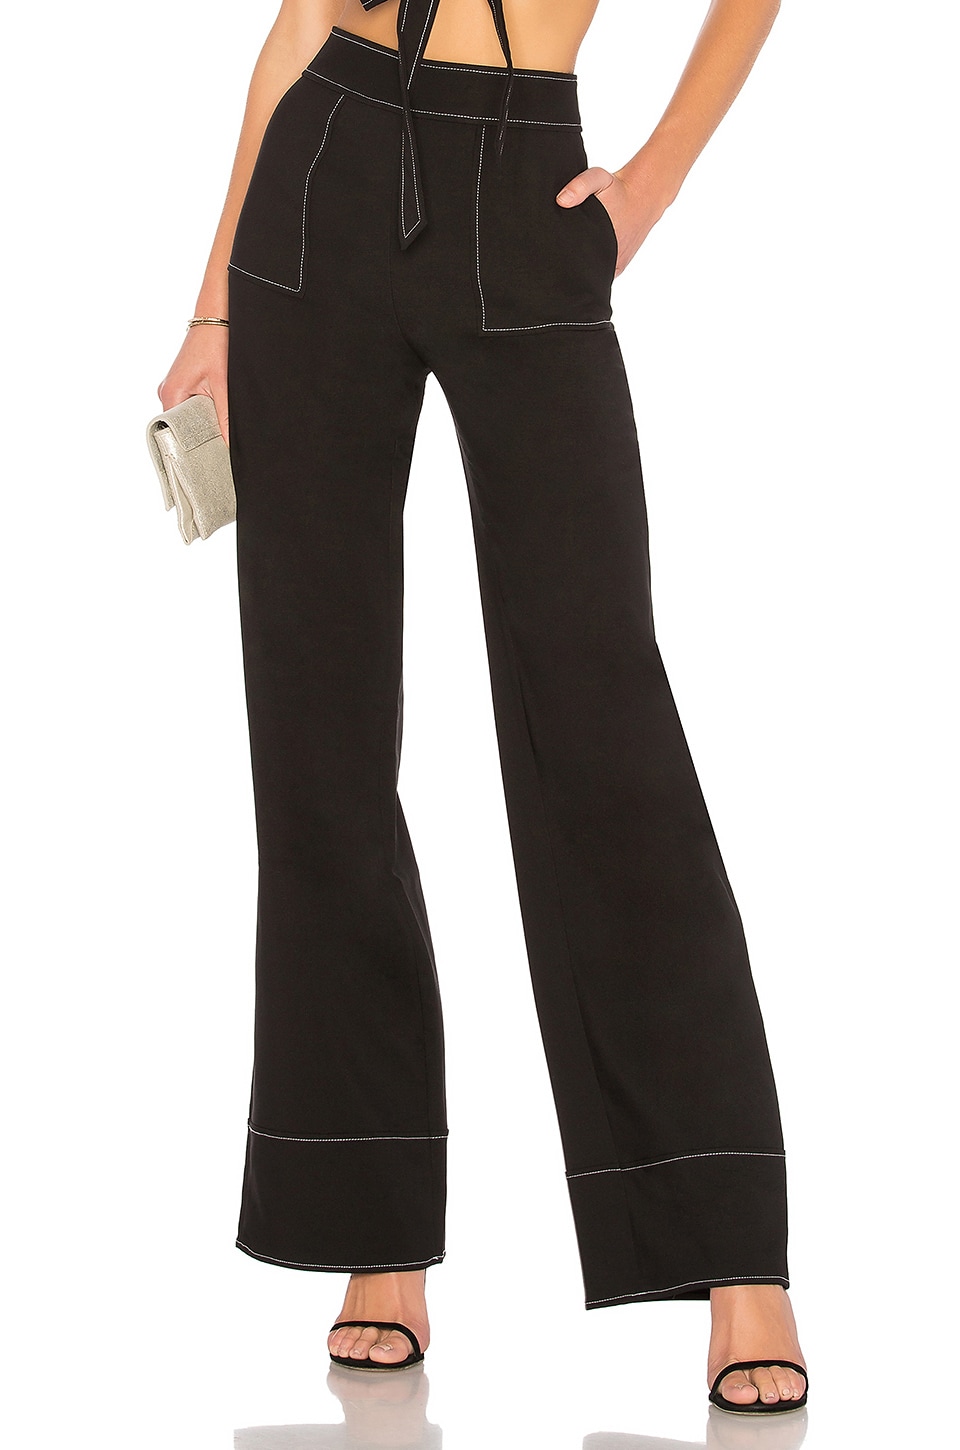 Lovers and Friends Sedge Pant in Night | REVOLVE